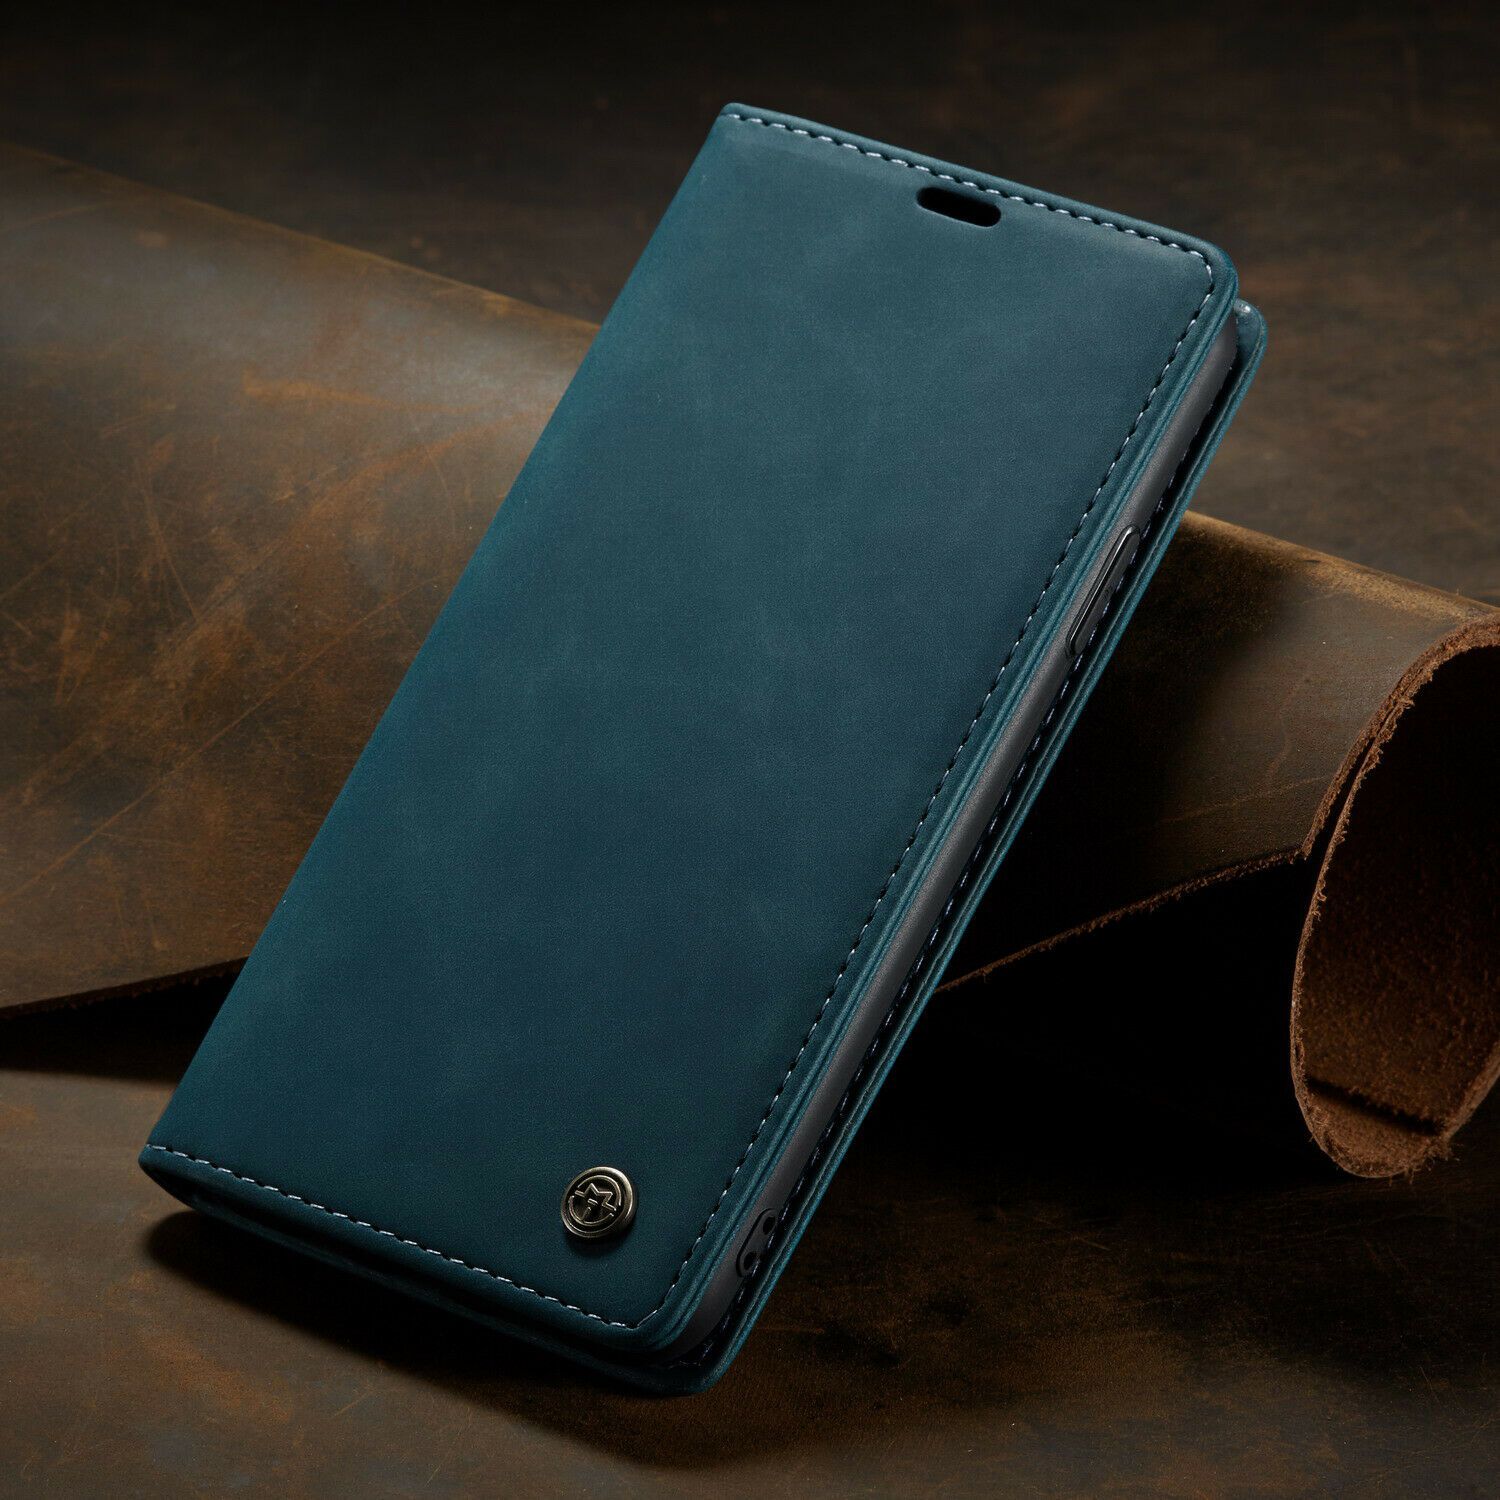 iPhone 11 Pro XS Max XR X 8 7 Plus Case Magnetic Leather Wallet Flip Stand Cover 2000eseller For Apple iPhone XS Max Peacock Blue 